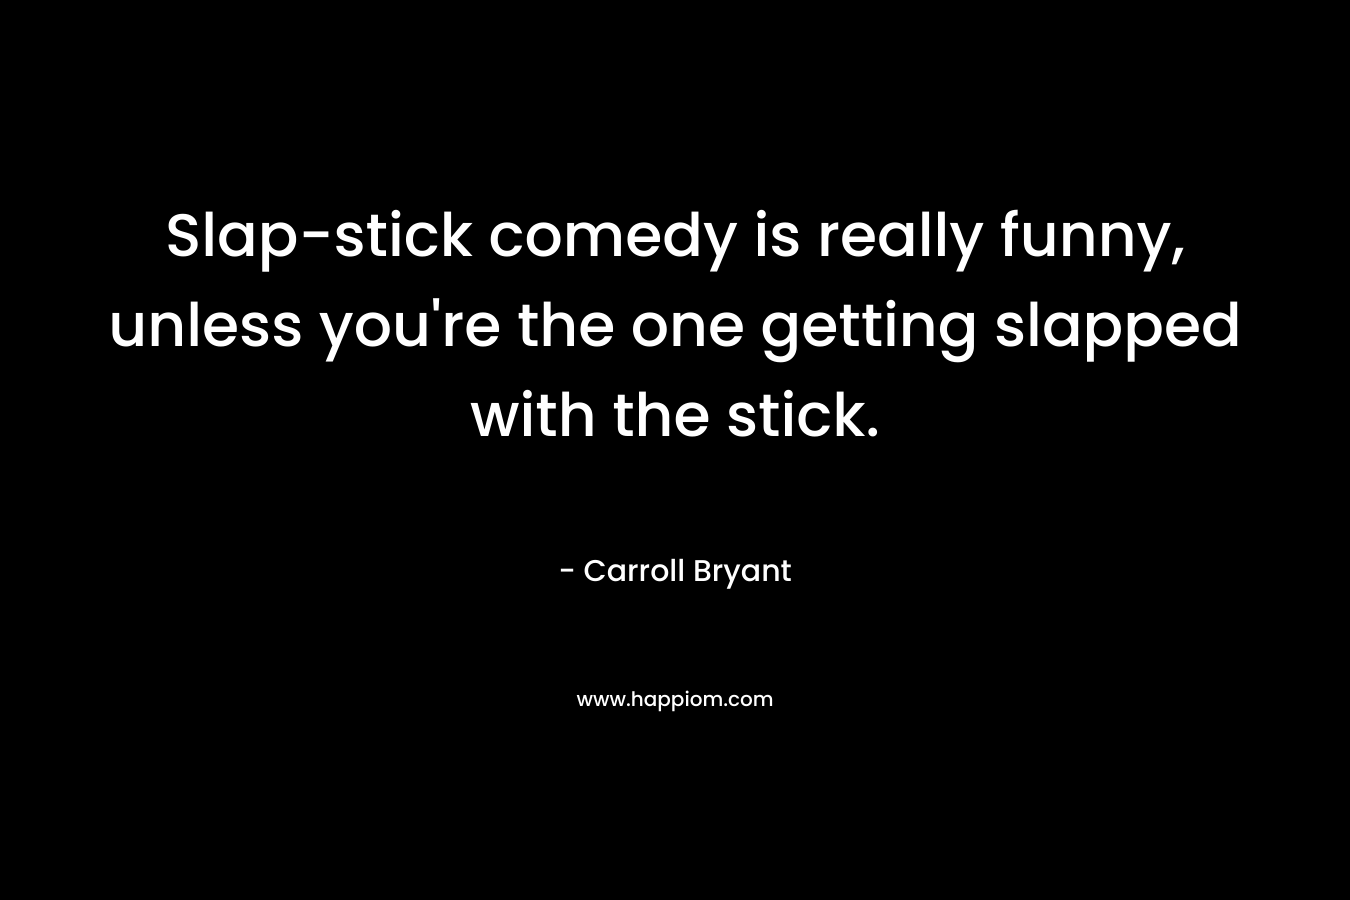 Slap-stick comedy is really funny, unless you're the one getting slapped with the stick.